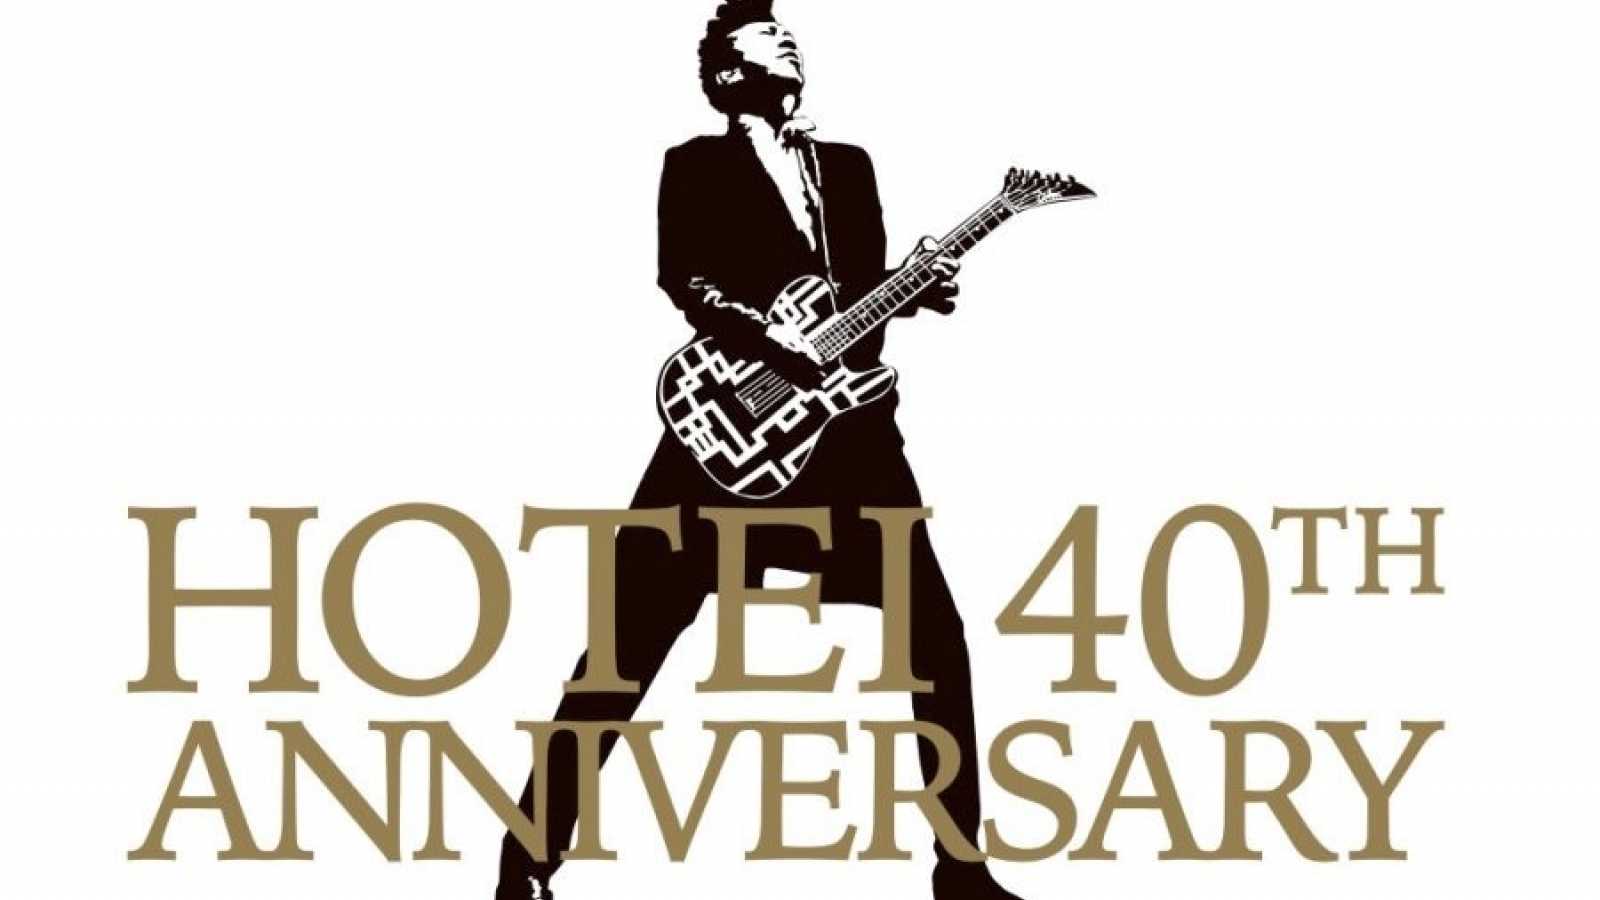 HOTEI Announces 40th Anniversary No-Audience Live Stream Concerts © Dada Music Ltd. All rights reserved.